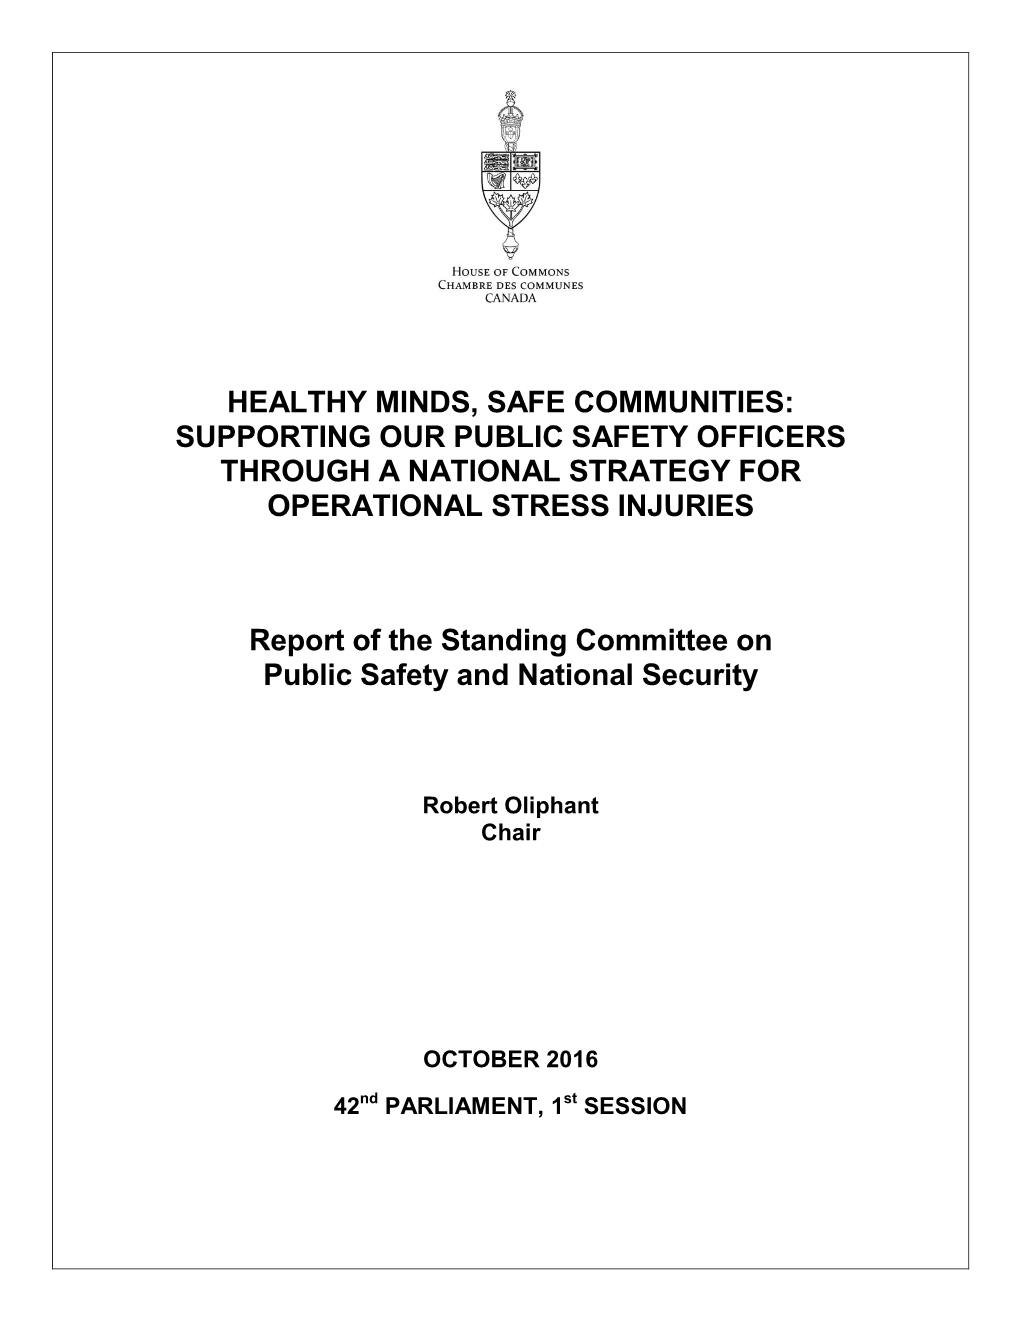 Report of the Standing Committee on Public Safety and National Security